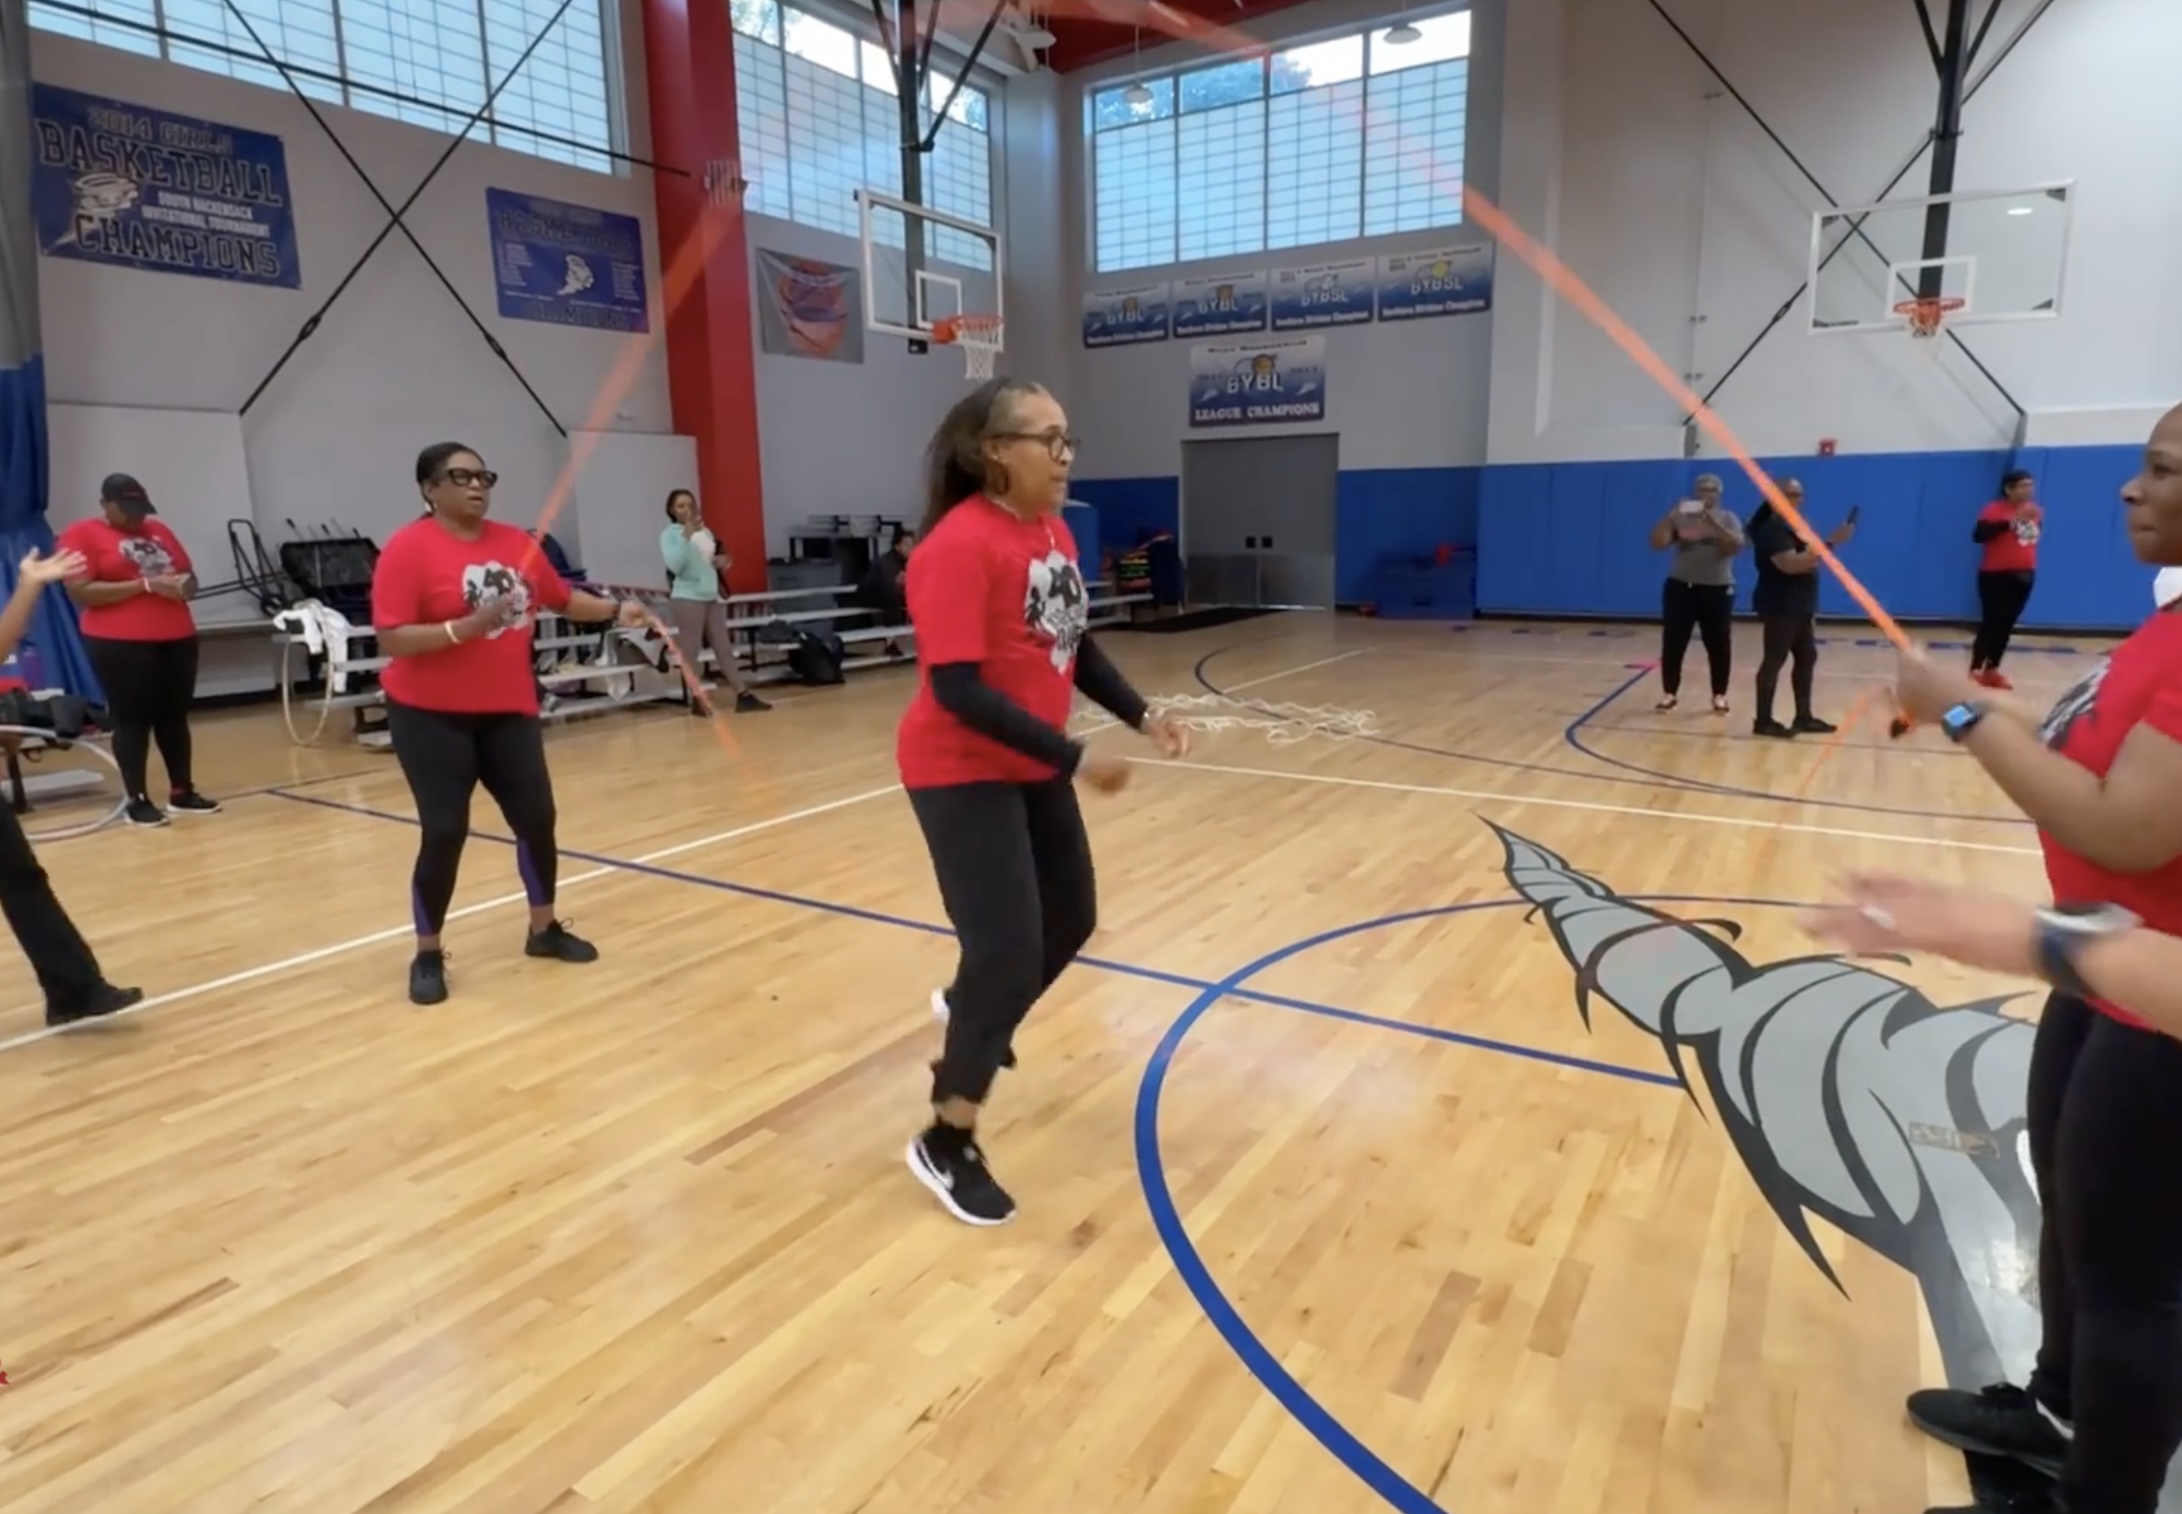 Members of the 40Plus Double Dutch Club, seen here meeting in Bergen County, New Jersey, find fellowship and health through their group. Photo credit: Allison J. Davis, NABJ Black News & Views